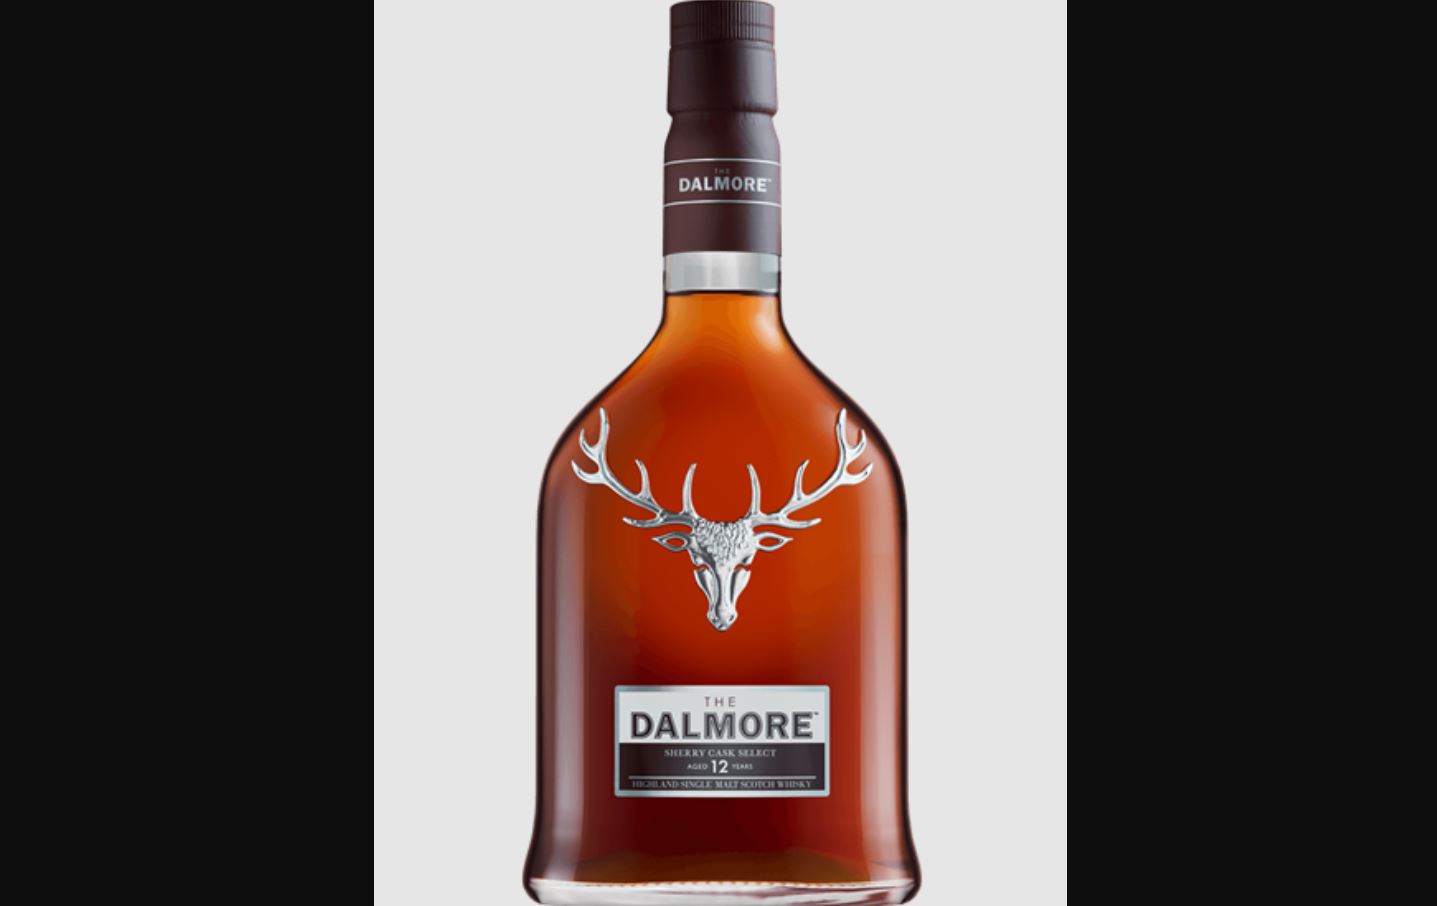 The Dalmore 12 Sherry Cask Reserve